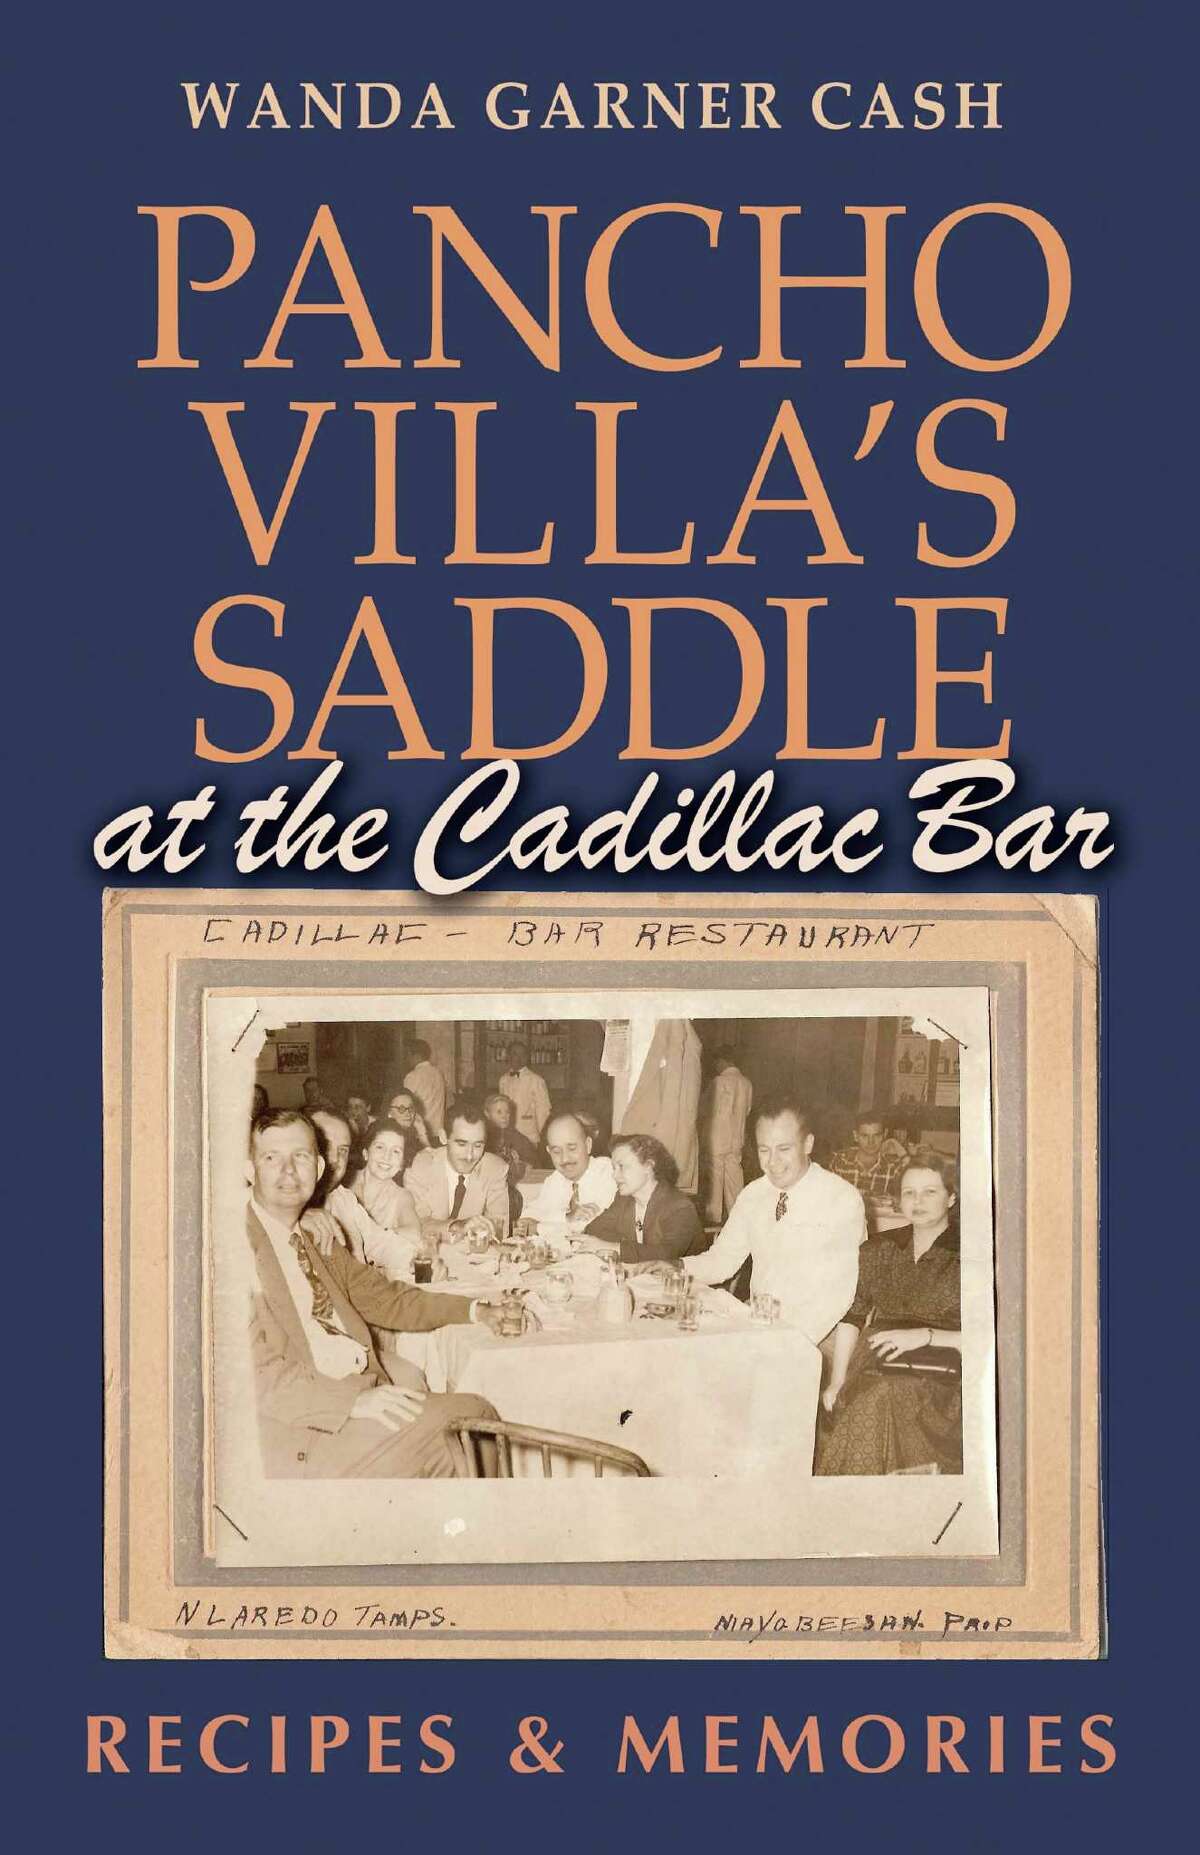 Cover of “Pancho Villa’s Saddle at the Cadillac Bar,” by Wanda Garner Cash, published in 2020 by Texas A&M University Press